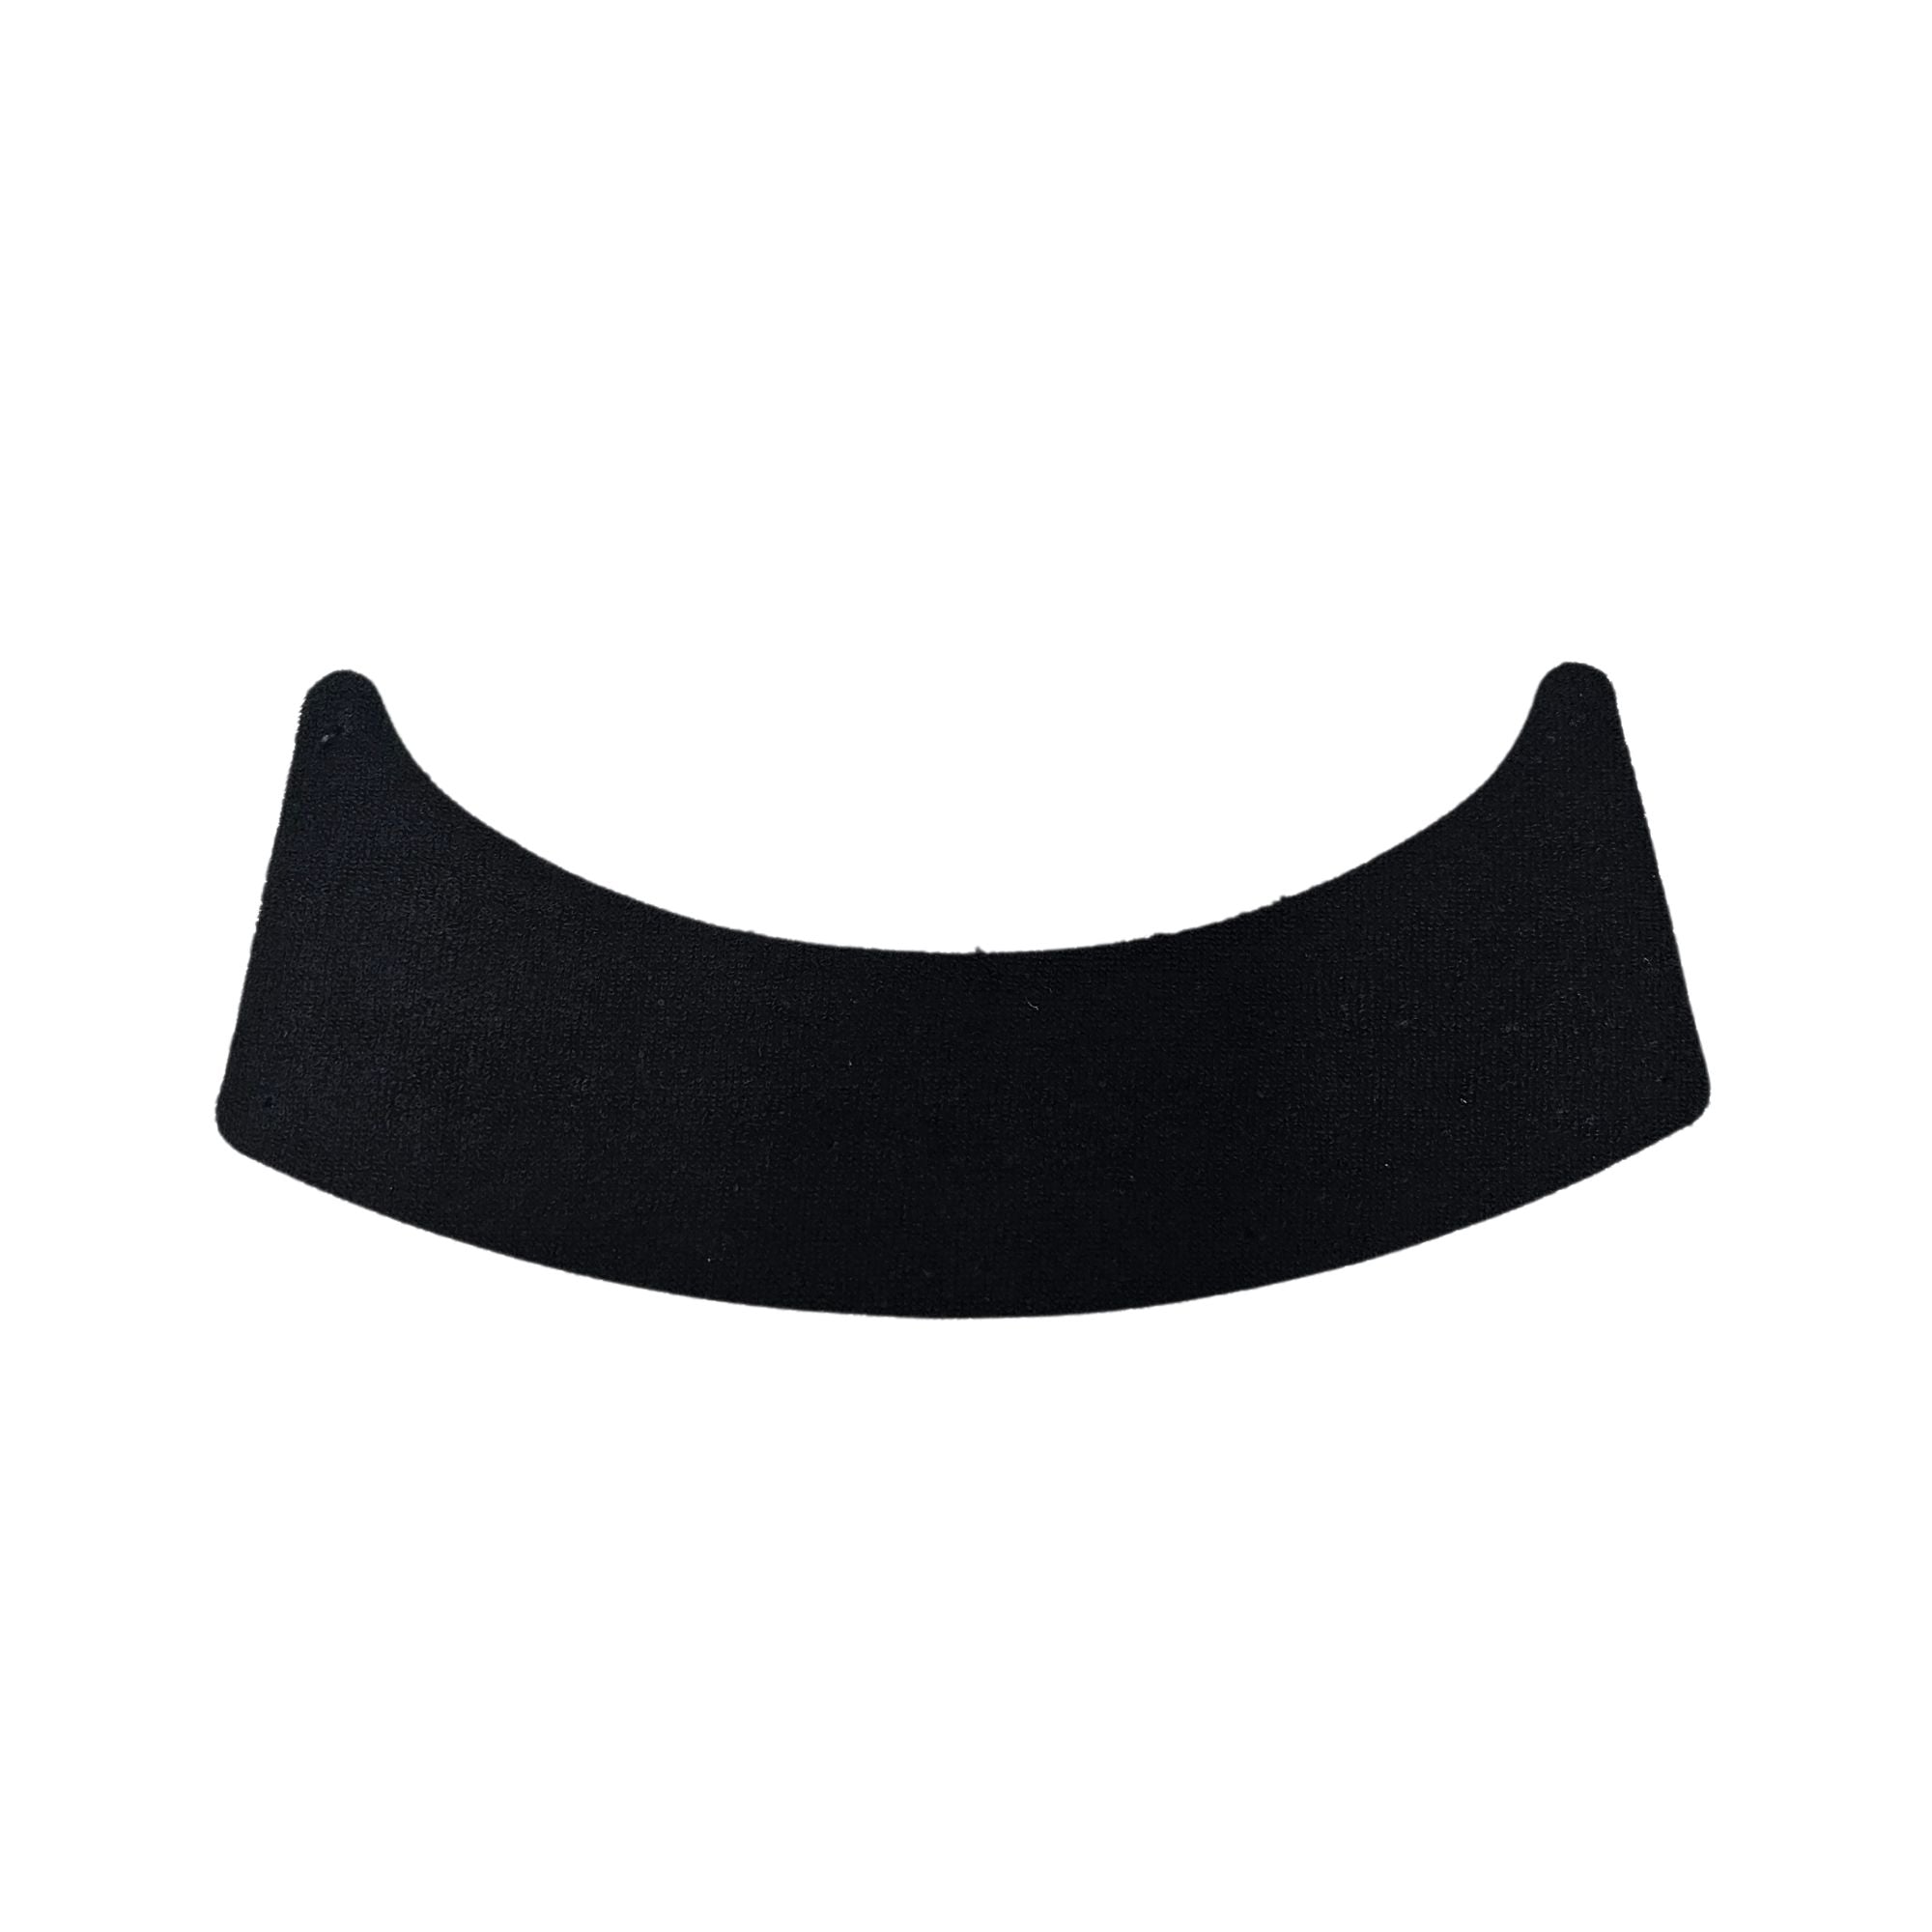 STIHL Sweatband Replacement for Function Helmet System | 0000 889 9044